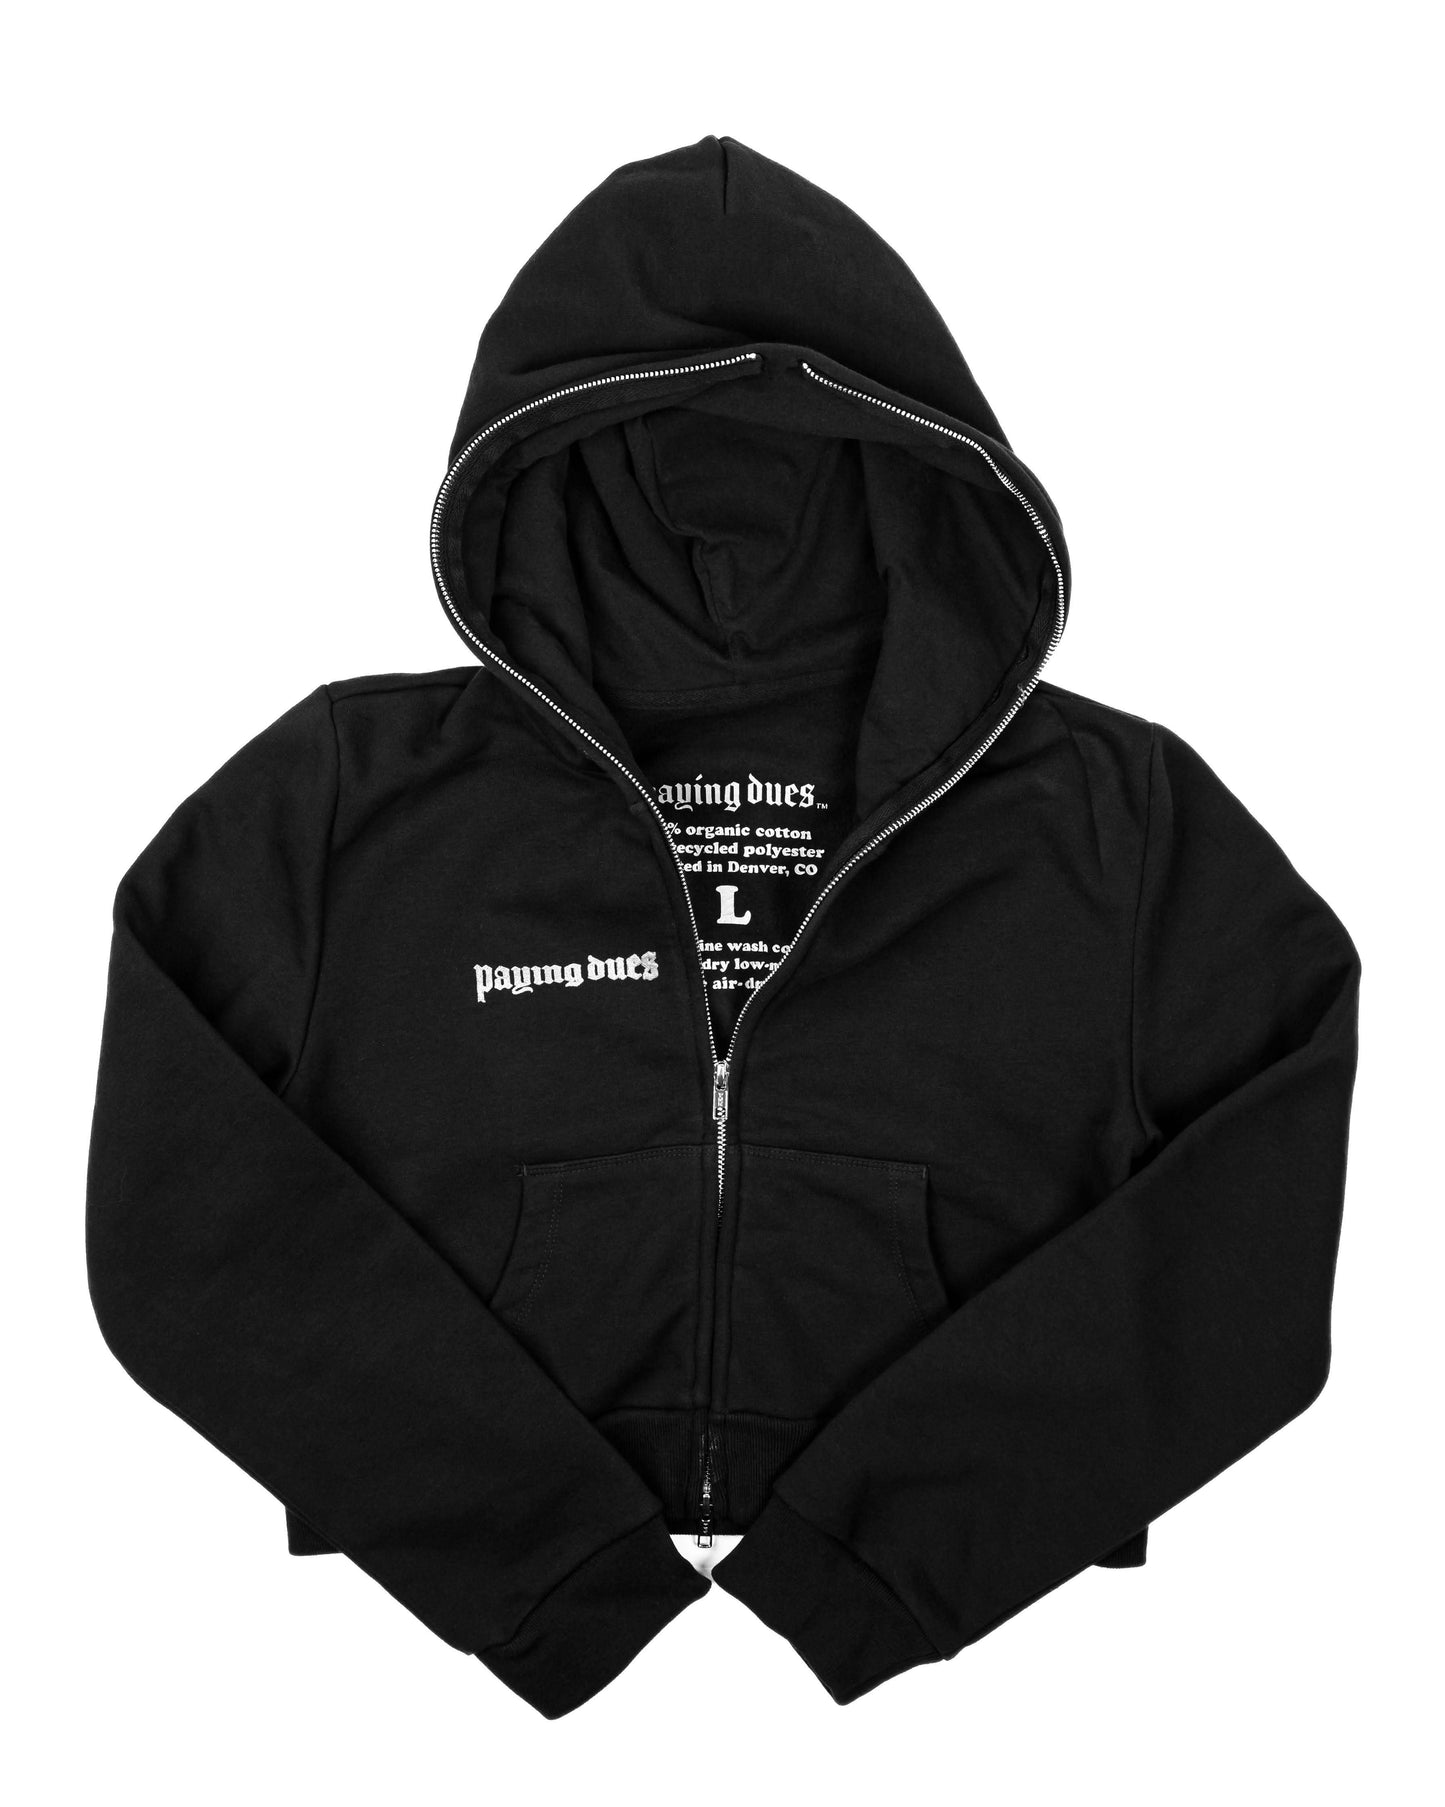 Super Founder Cropped Hoodie